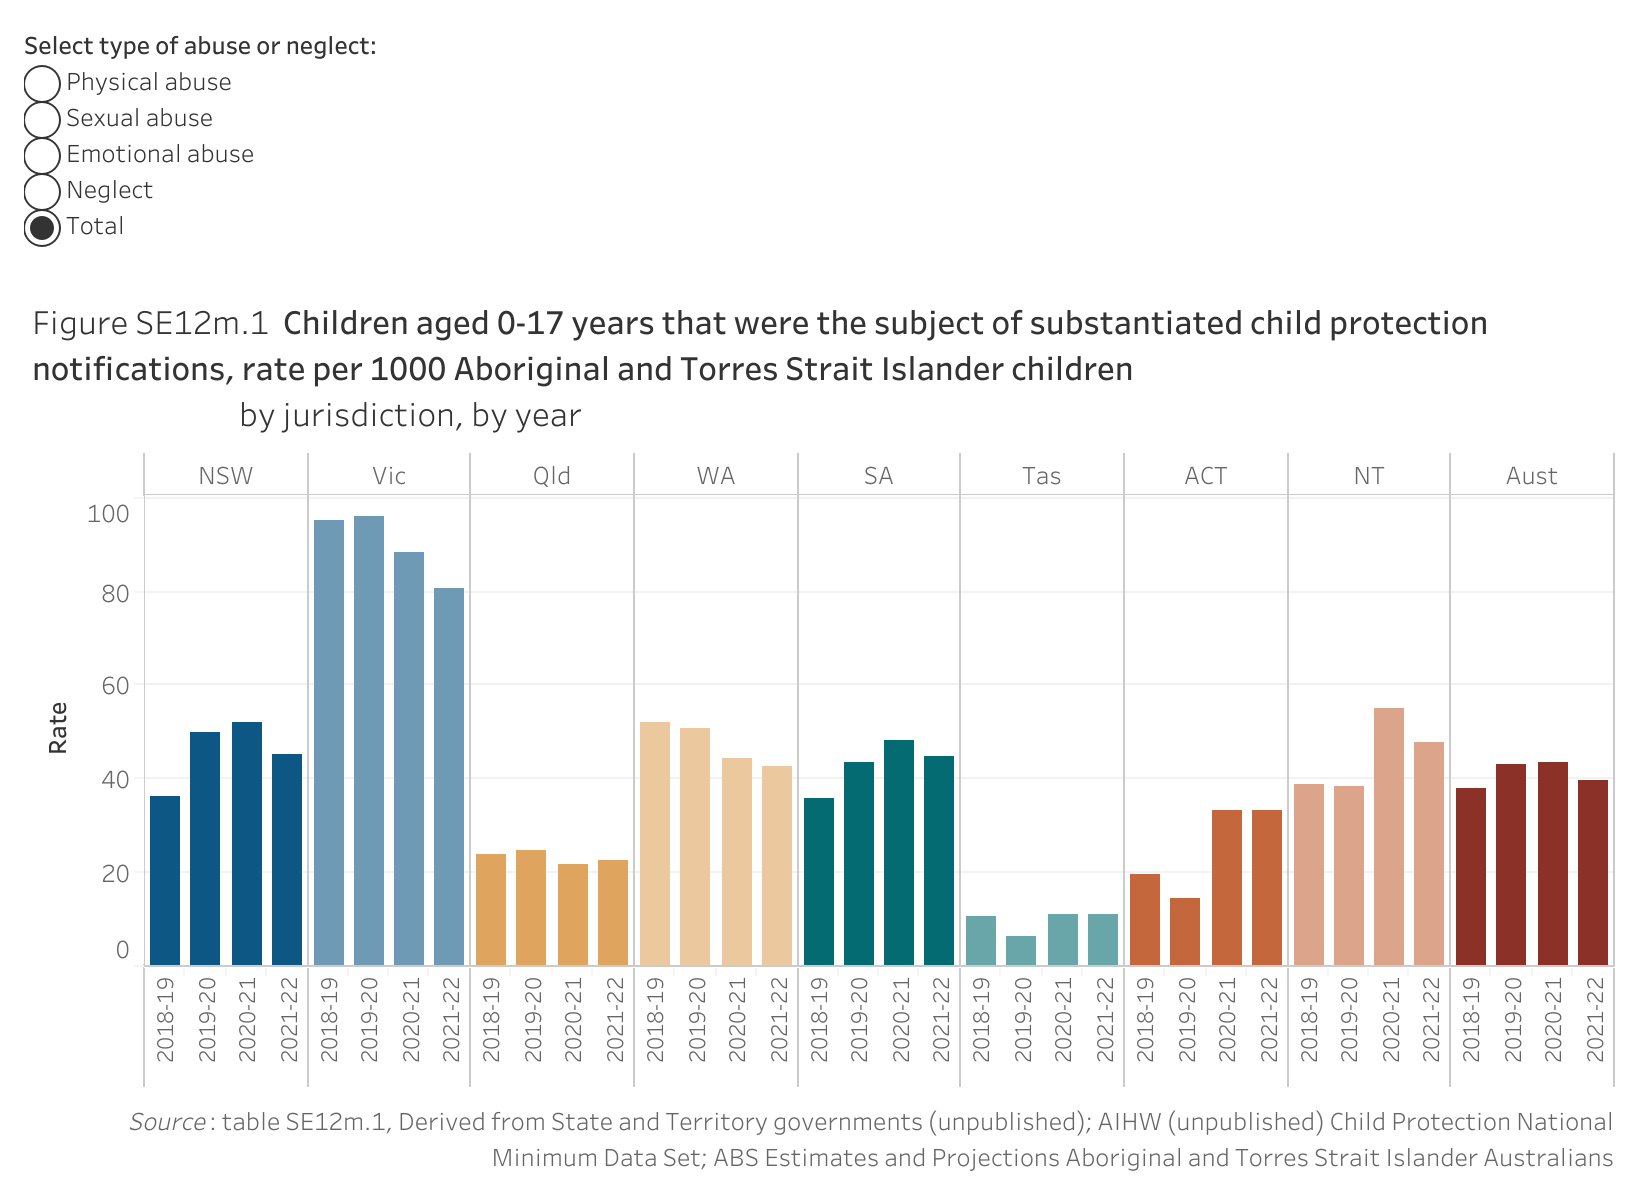 Figure SE12m.1 shows children aged 0-17 years that were the subject of substantiated child protection notifications, rate per 1000 Aboriginal and Torres Strait Islander children, by jurisdiction, by year. More details can be found within the text near this image.